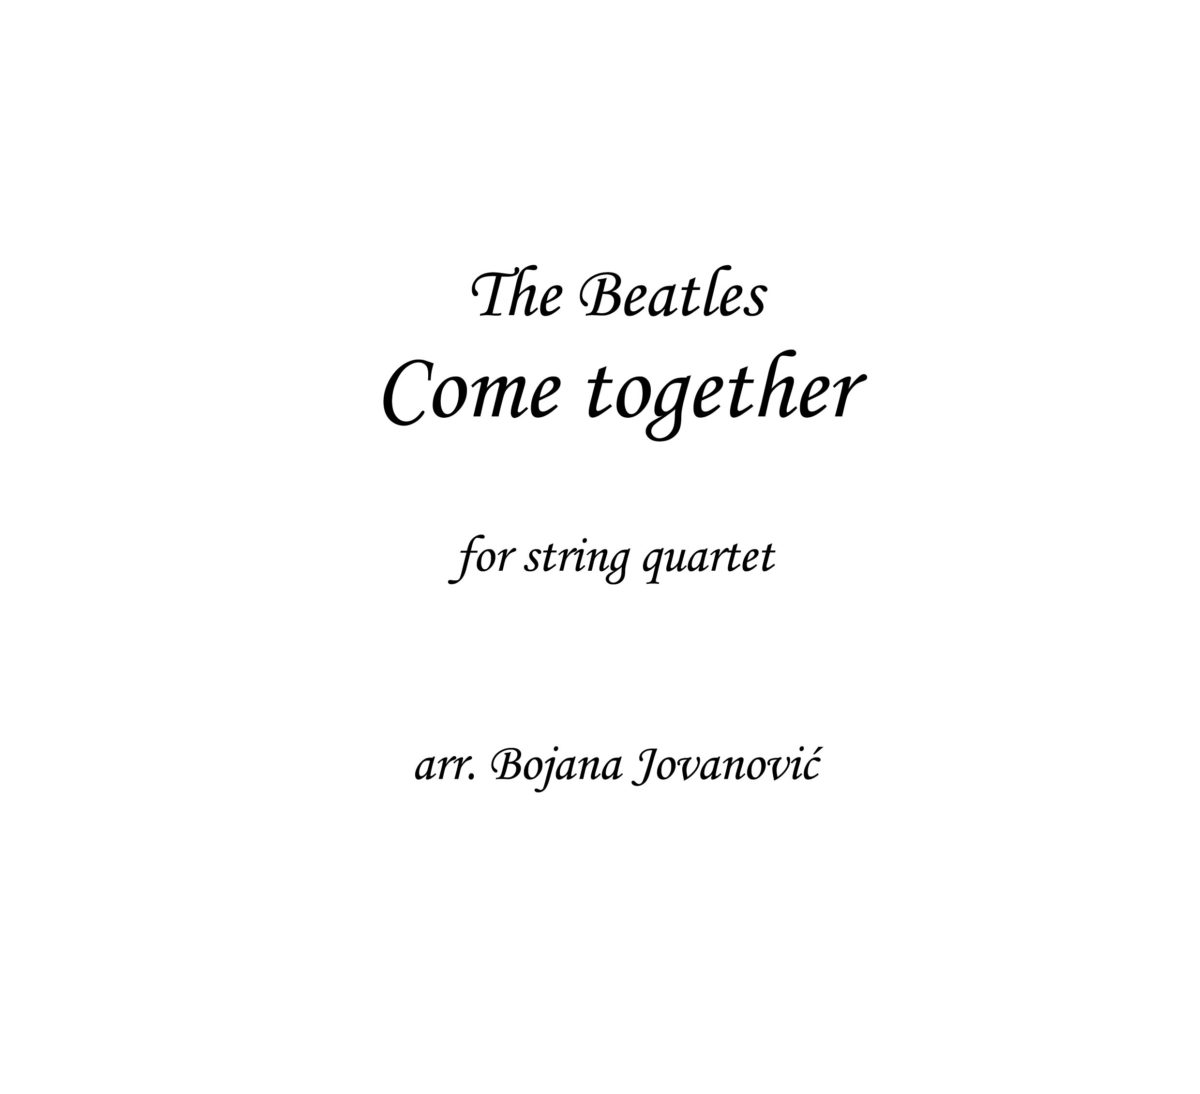 Come together (The Beatles) - Sheet Music